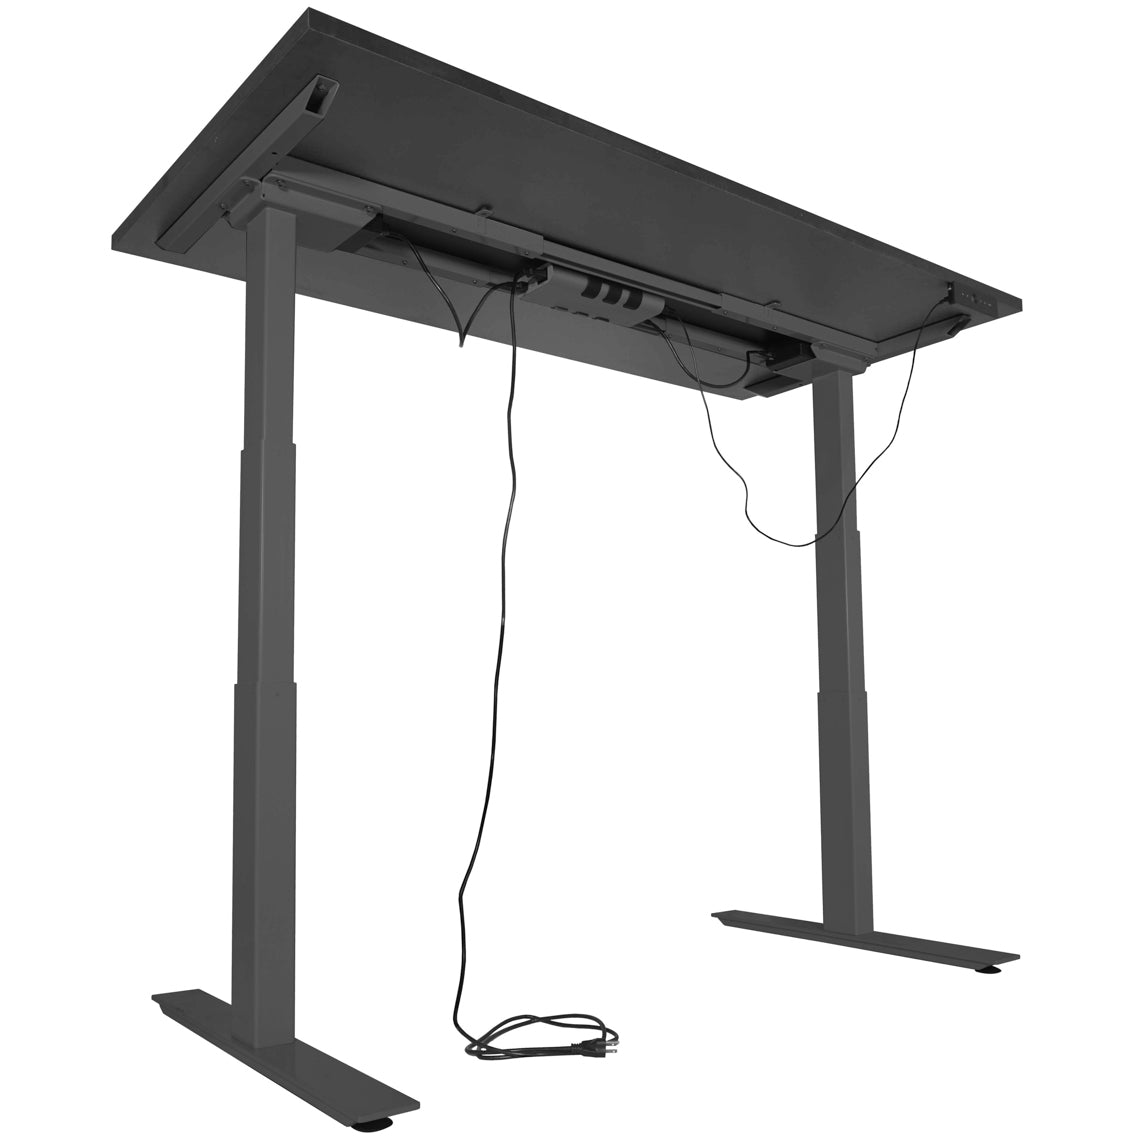 A6 Adjustable Sit To Stand Desk 24"- 50" w/ Black 30" x 48" Top - view 3